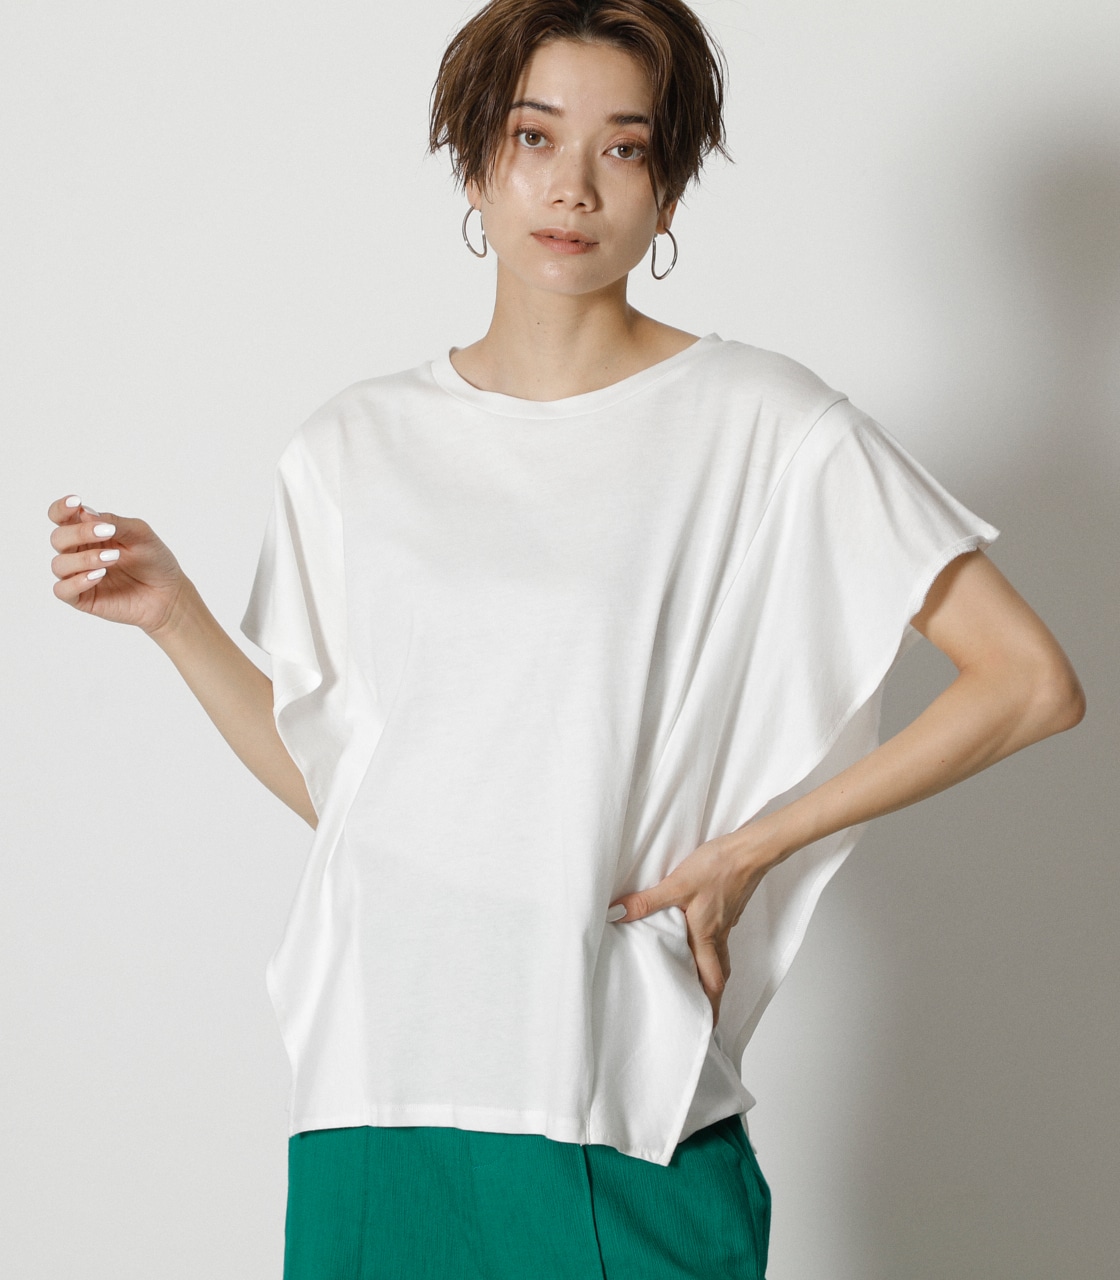 SLEEVE LAYERED TOPS/スリーブレイヤードトップス 詳細画像 O/WHT 1